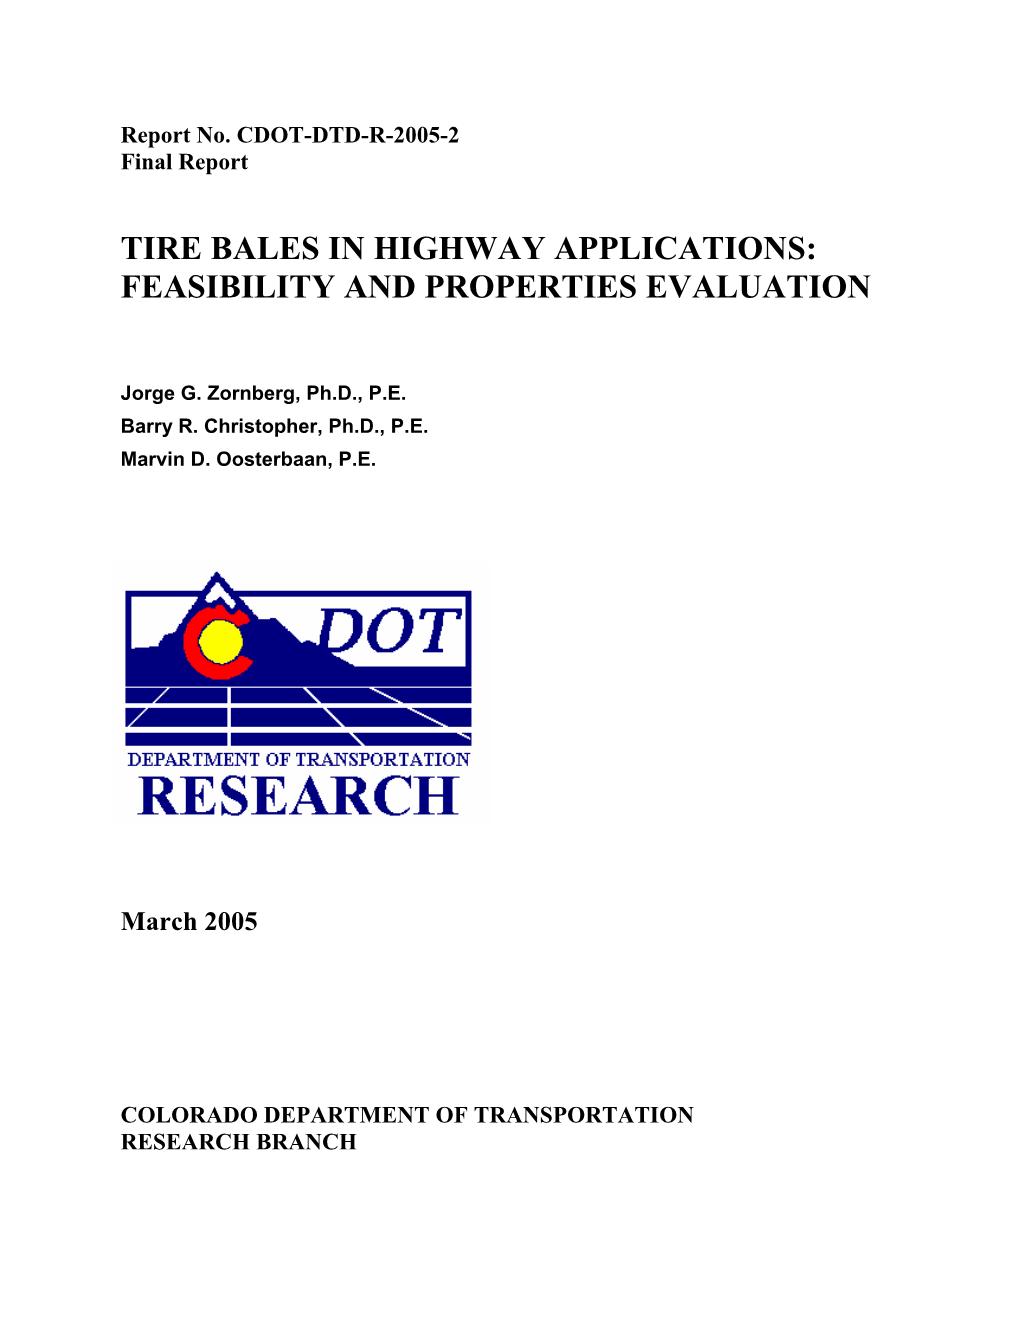 Tire Bales in Highway Applications: Feasibility and Properties Evaluation